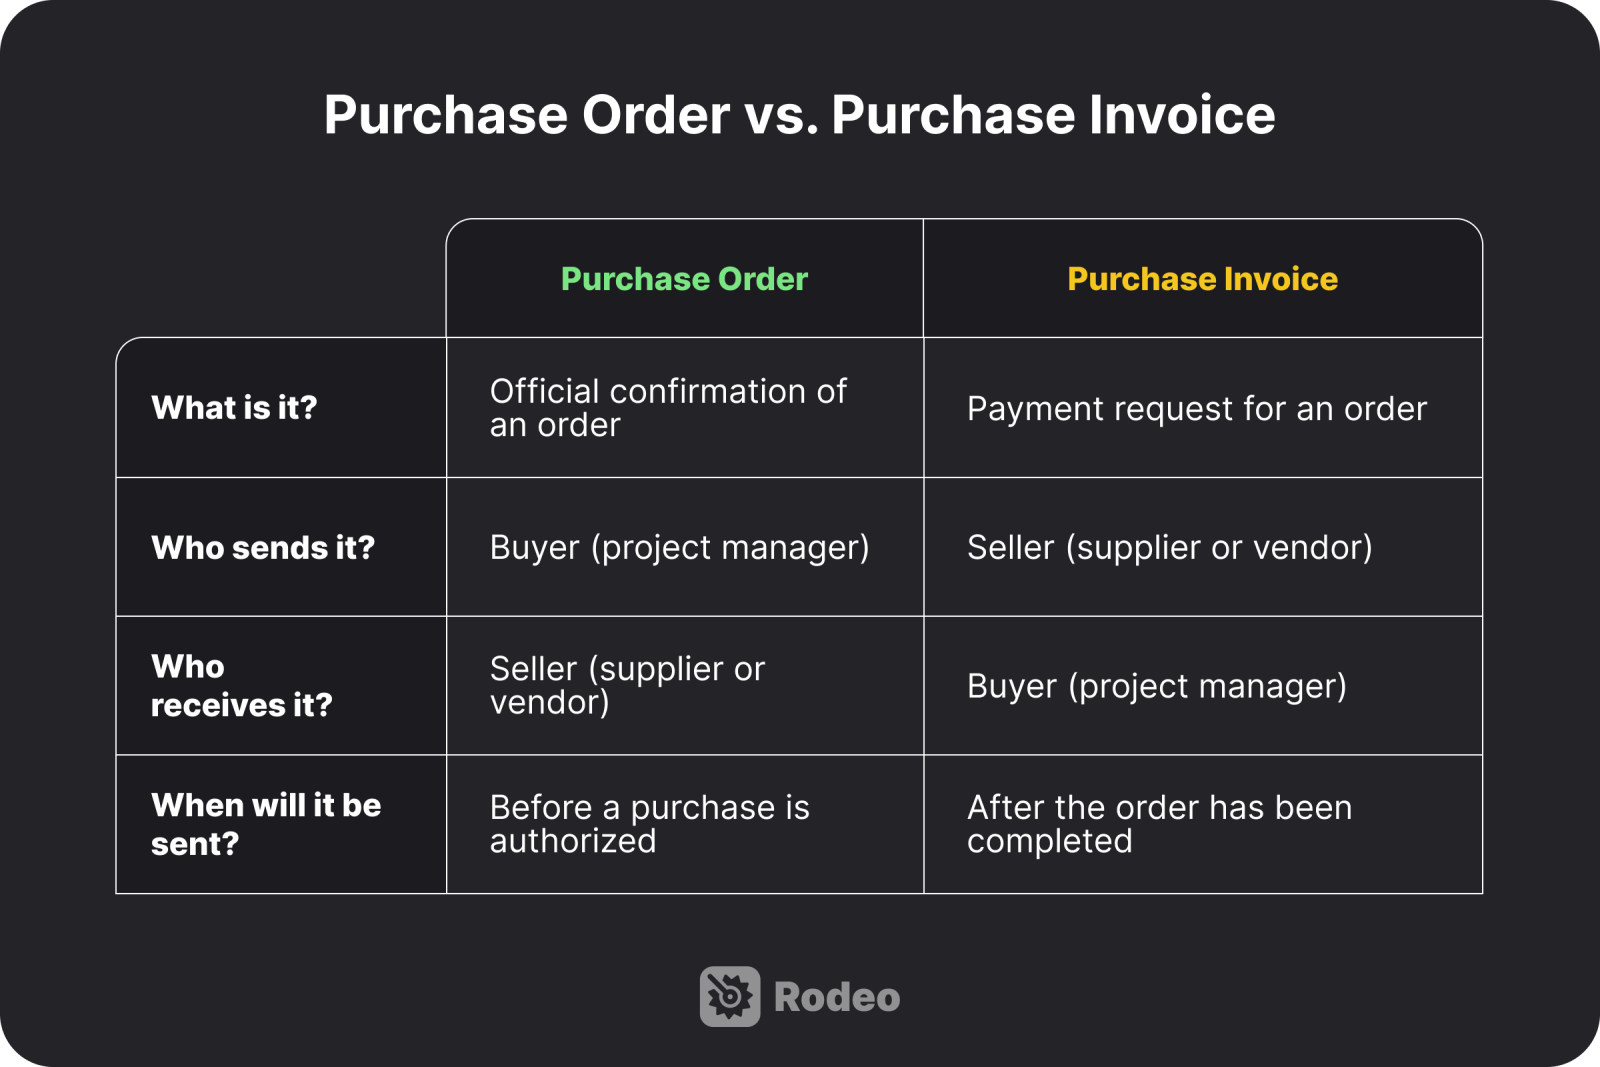 Table comparing purchase orders and purchase invoices